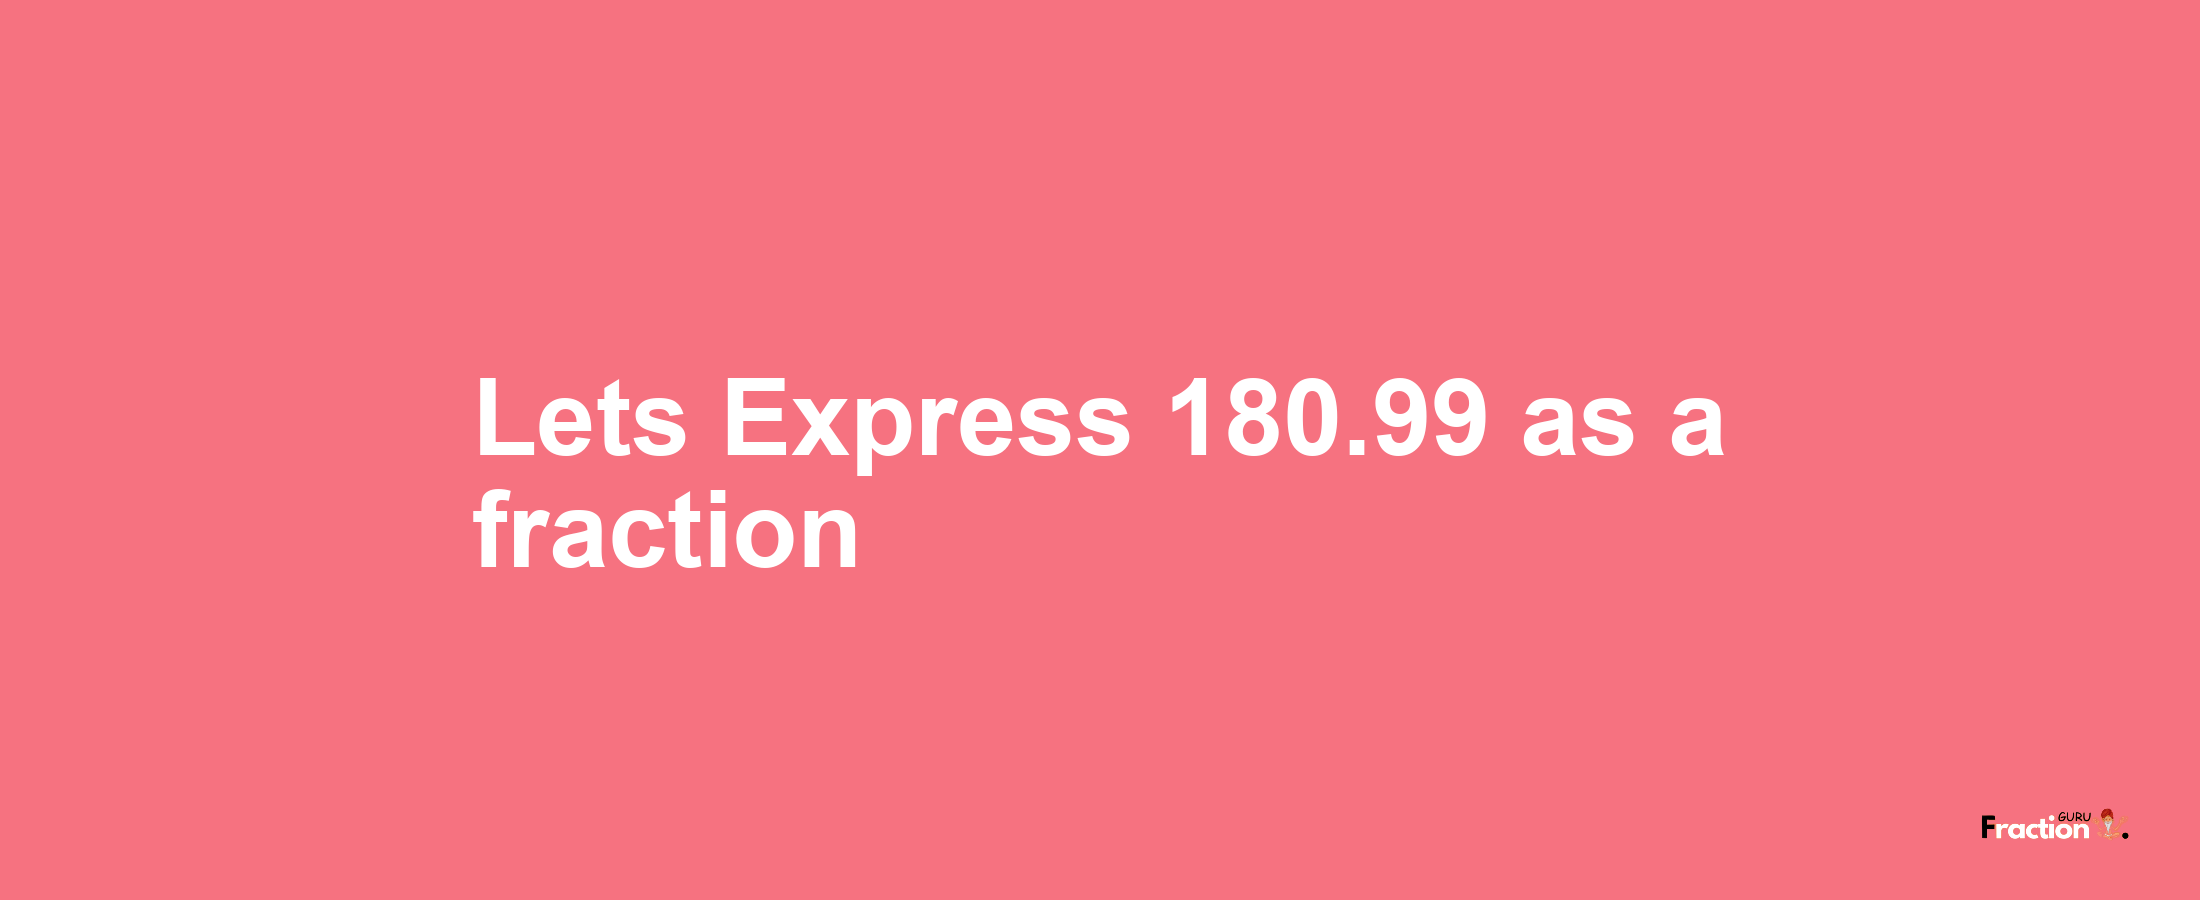 Lets Express 180.99 as afraction